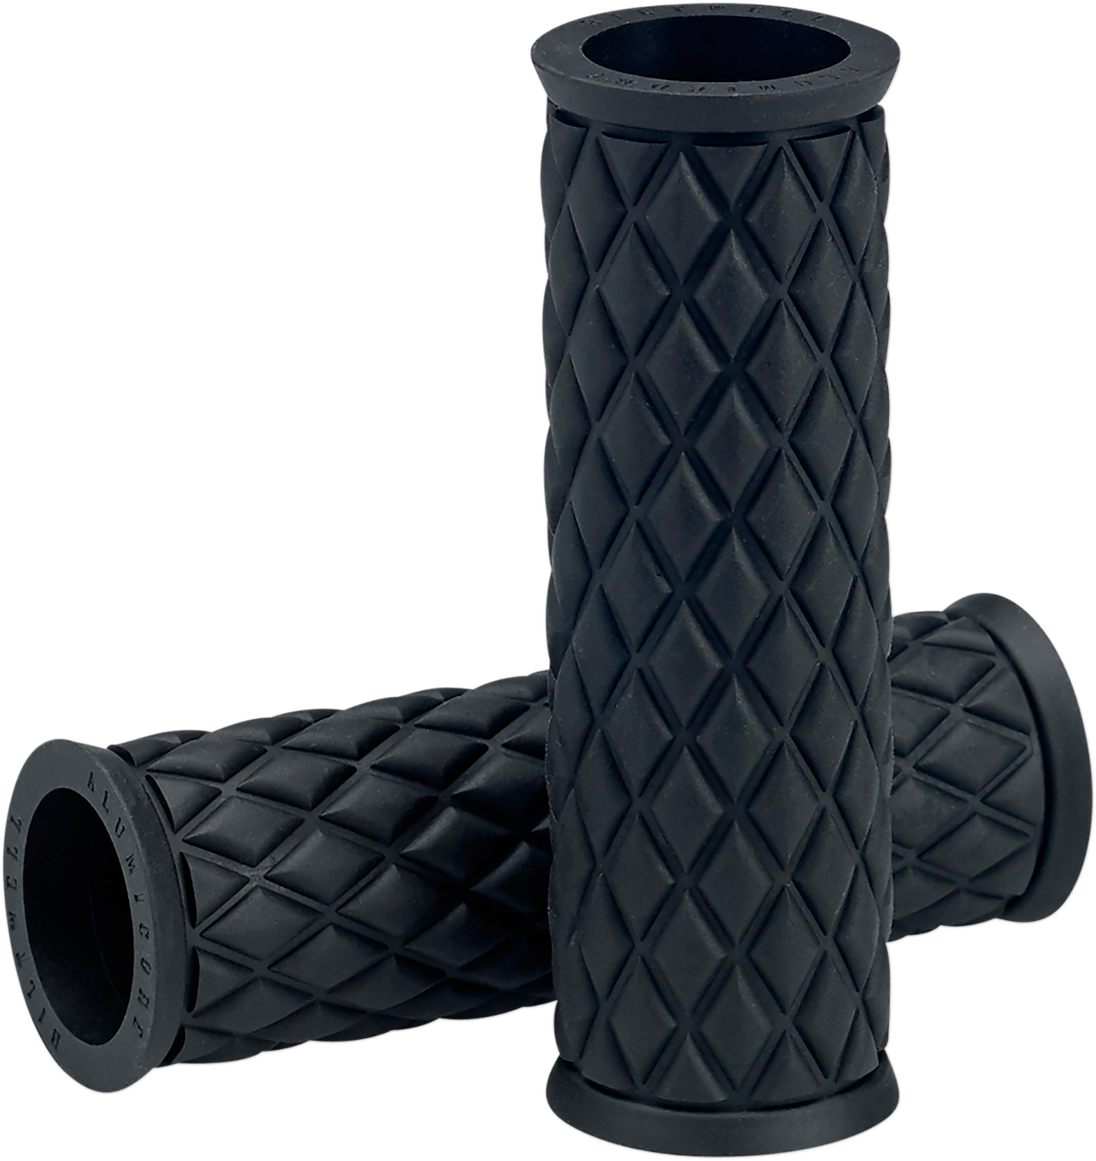 Biltwell Alumicore Black Replacement Rubber Grip Sleeve for Harley Davidson